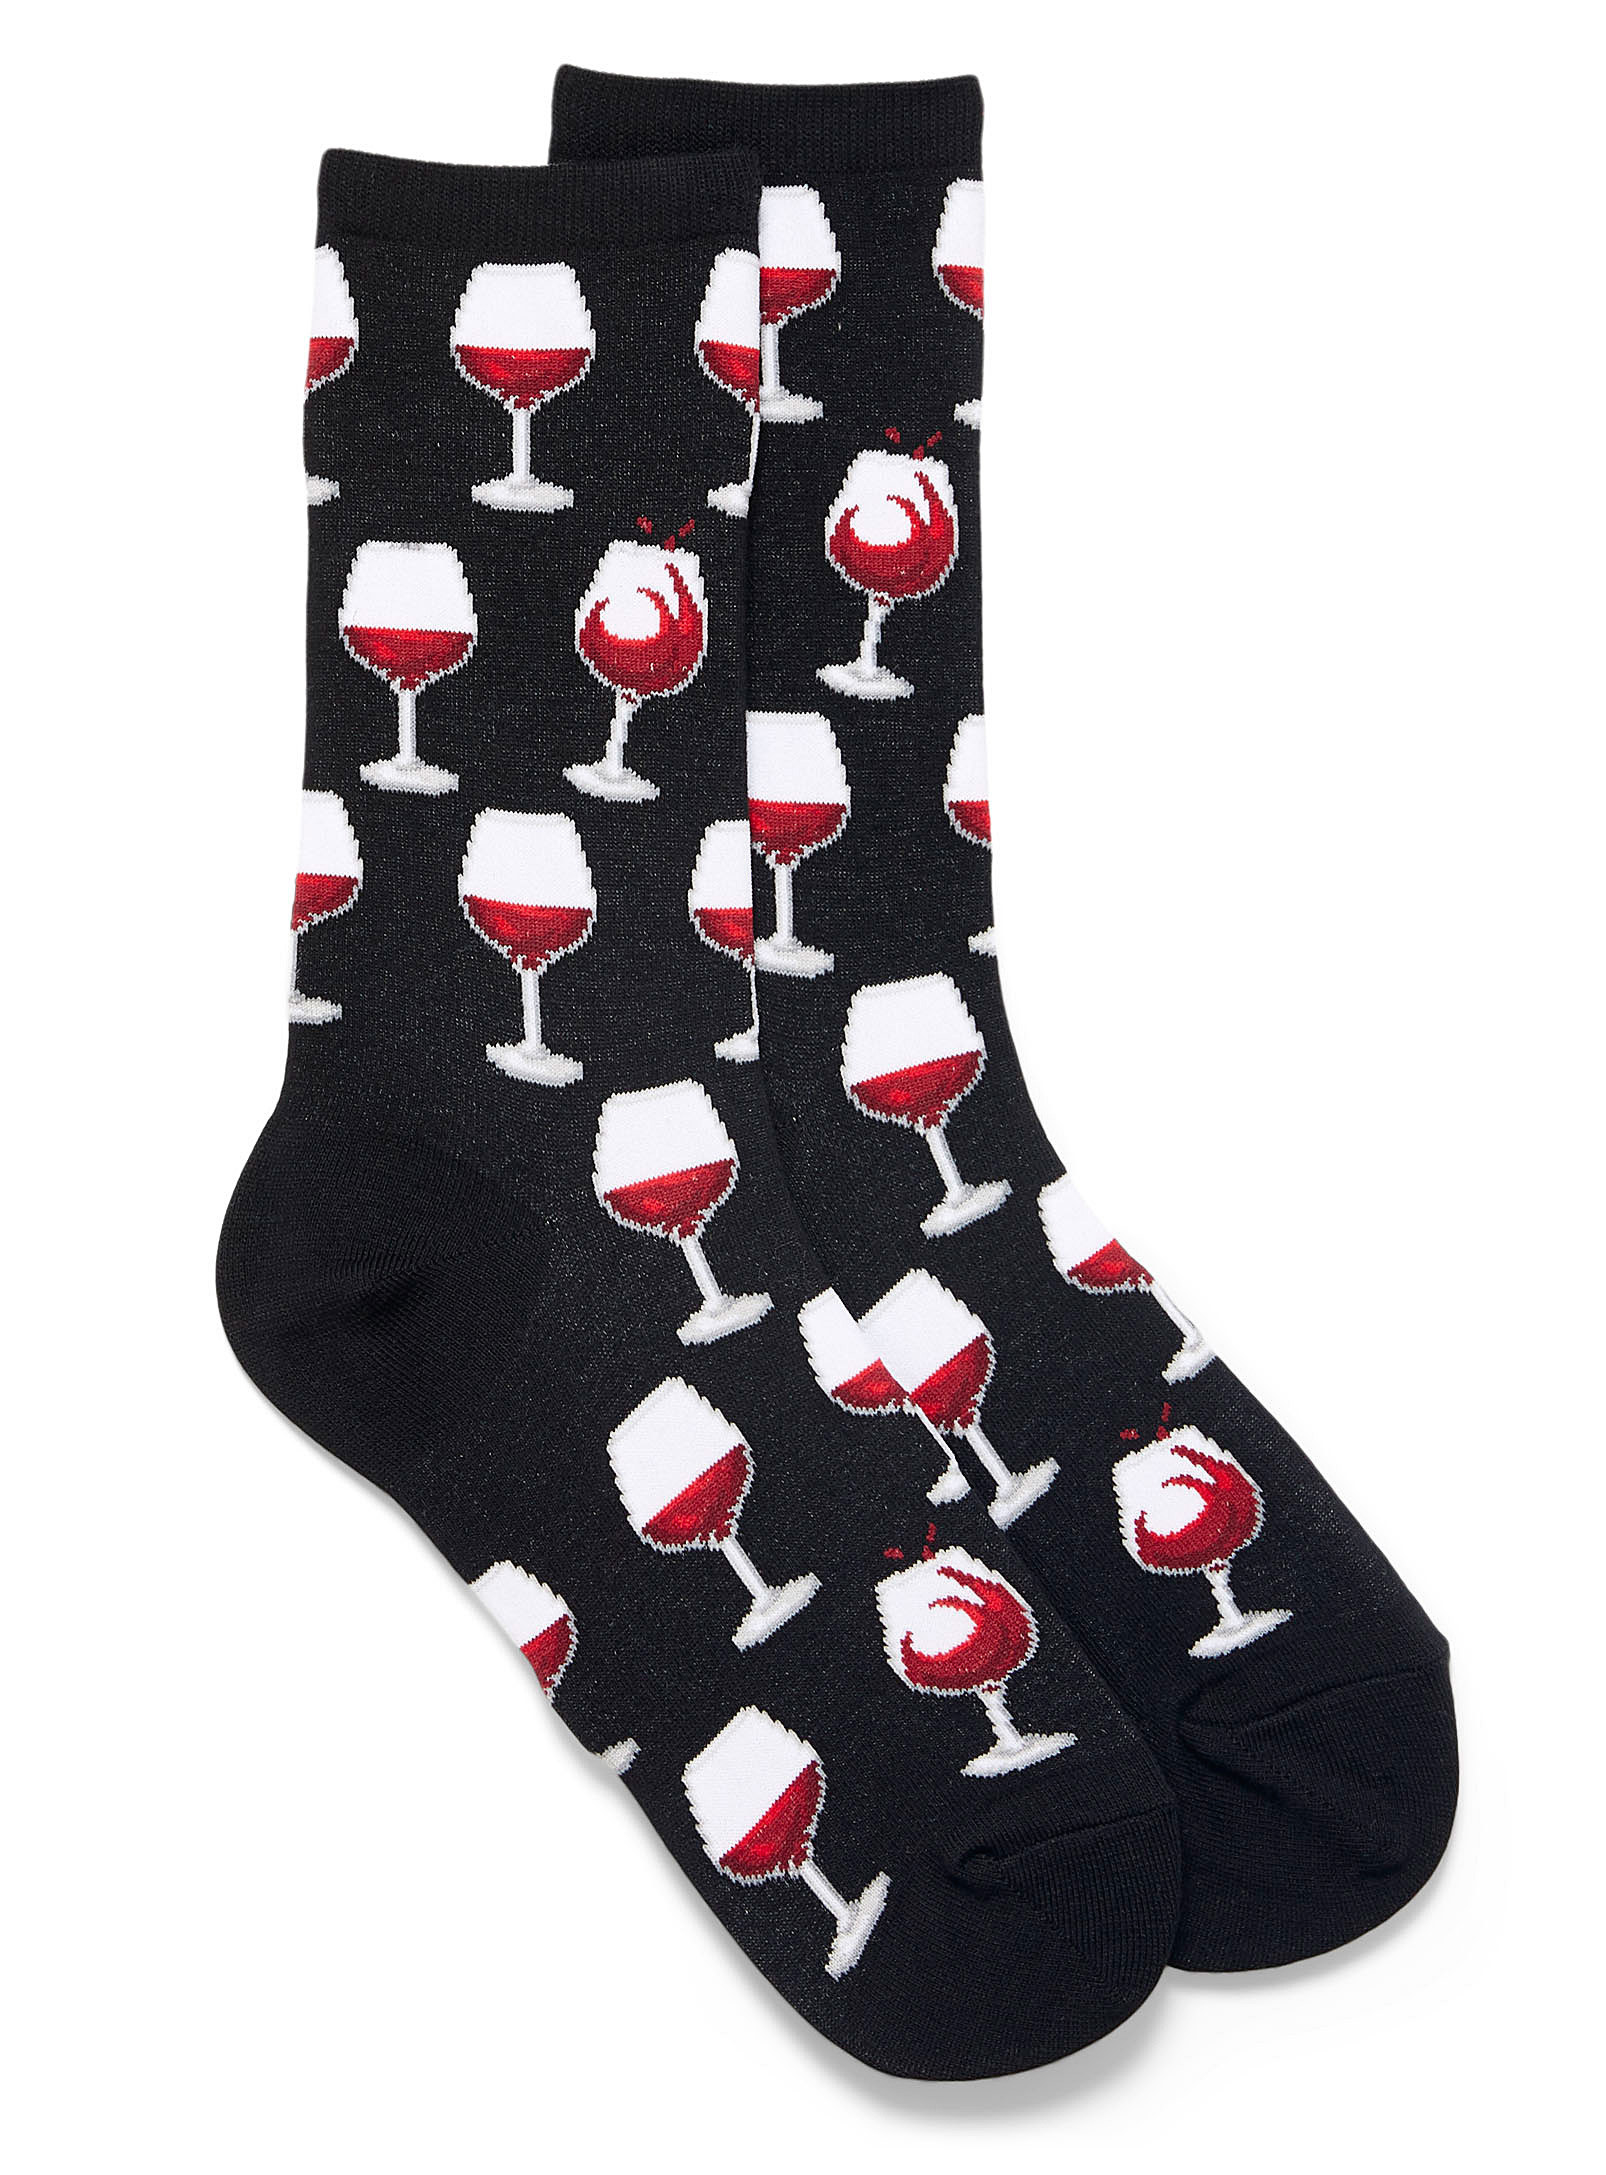 A pair of socks with wine glasses on them